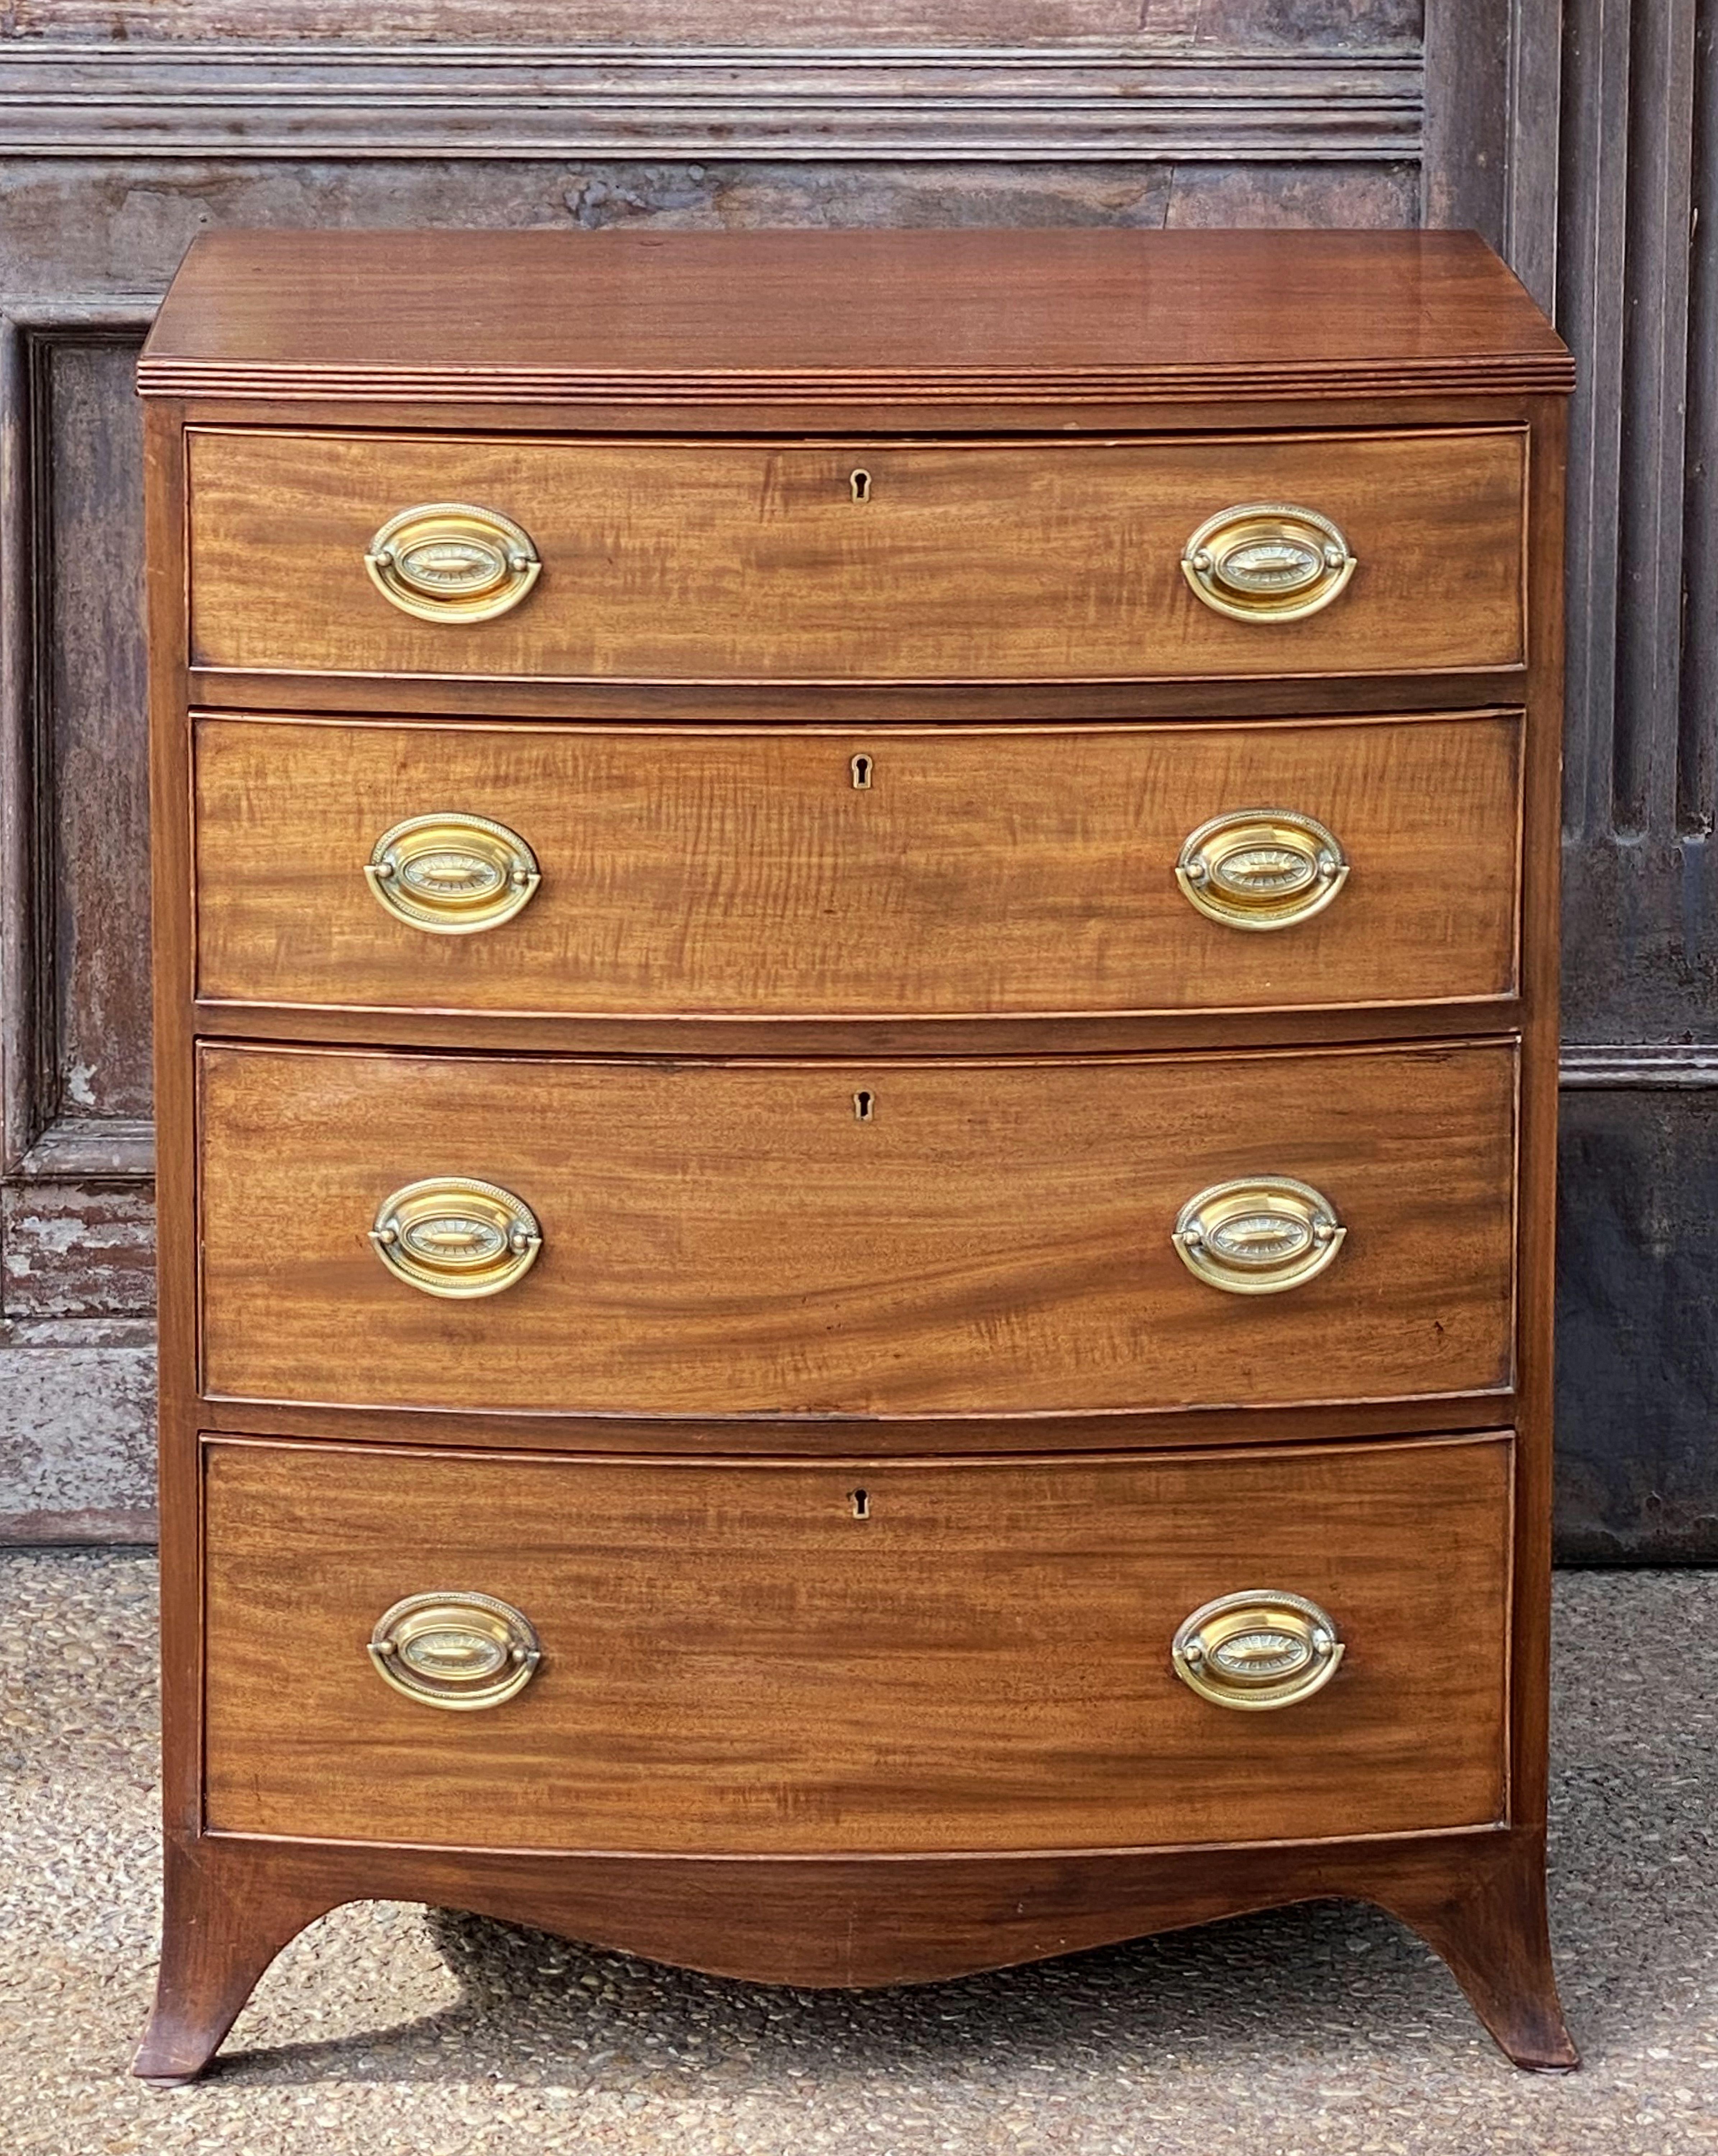 A handsome English bow-front chest of drawers of mahogany from the 19th century - featuring a bowed top over a frieze of four beaded drawers, each drawer with fine flame-cut mahogany veneers, brass handle pulls, and brass escutcheons, set upon a